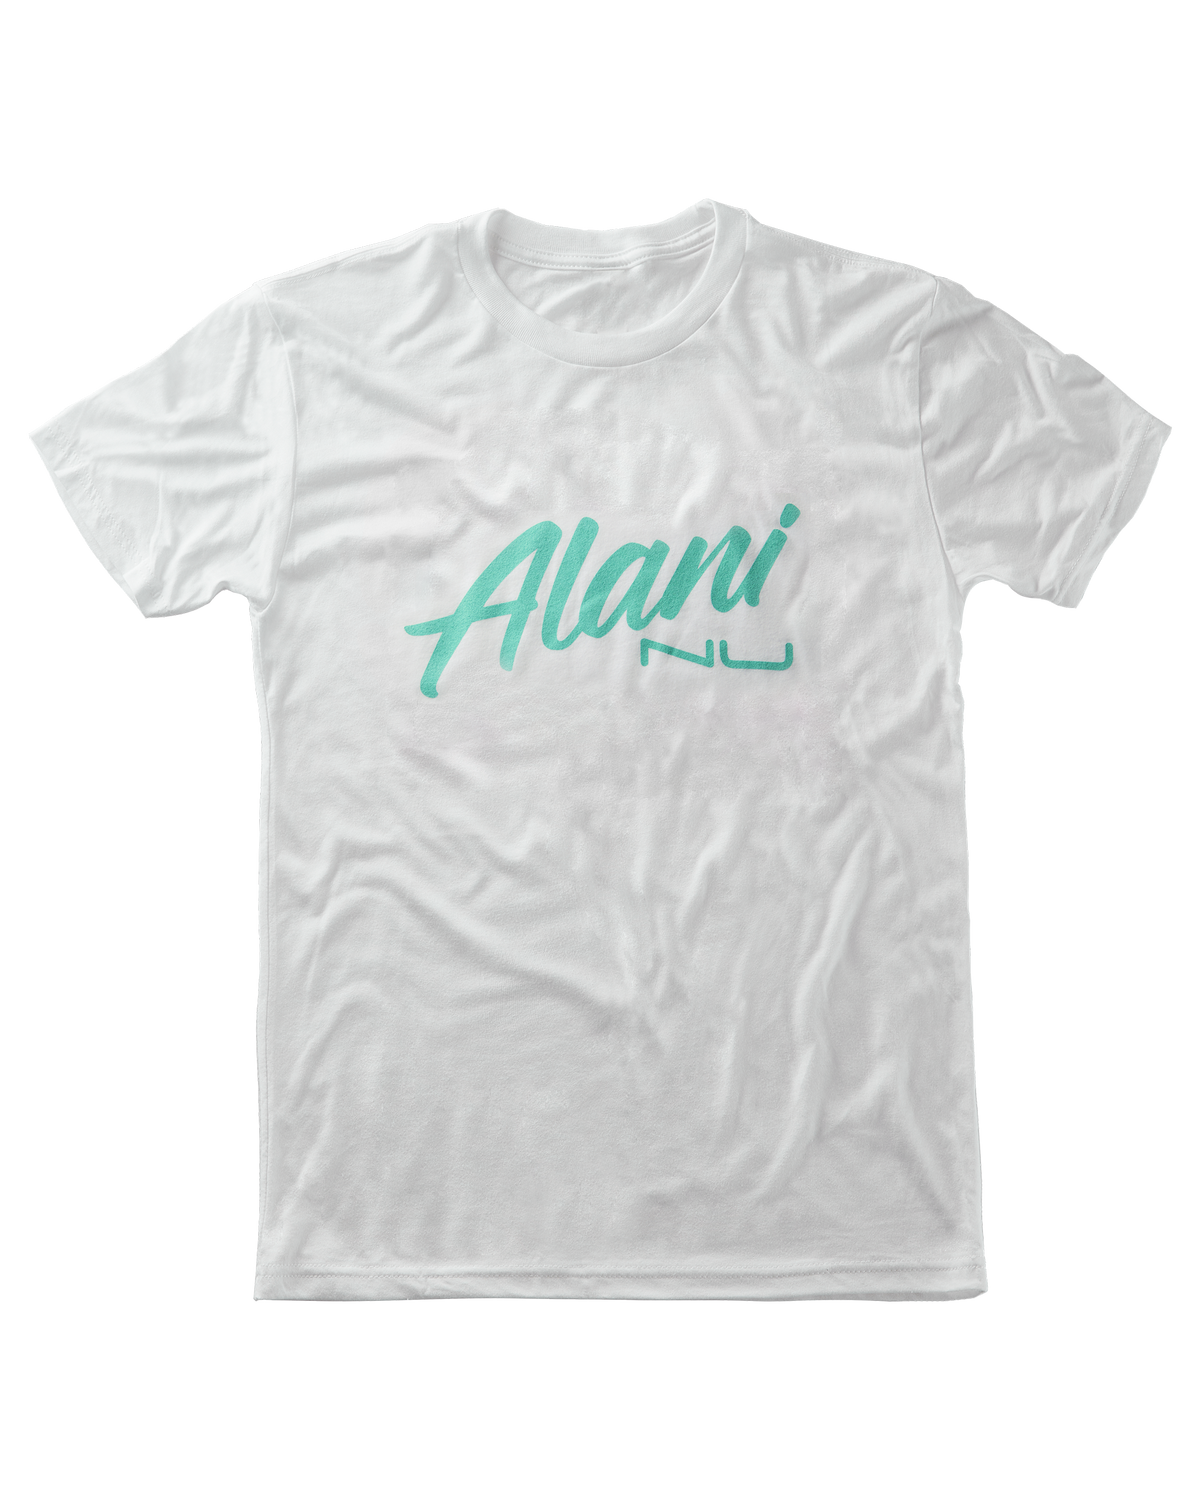 A Seafoam On White T-Shirt with the word Alani Nu in green.